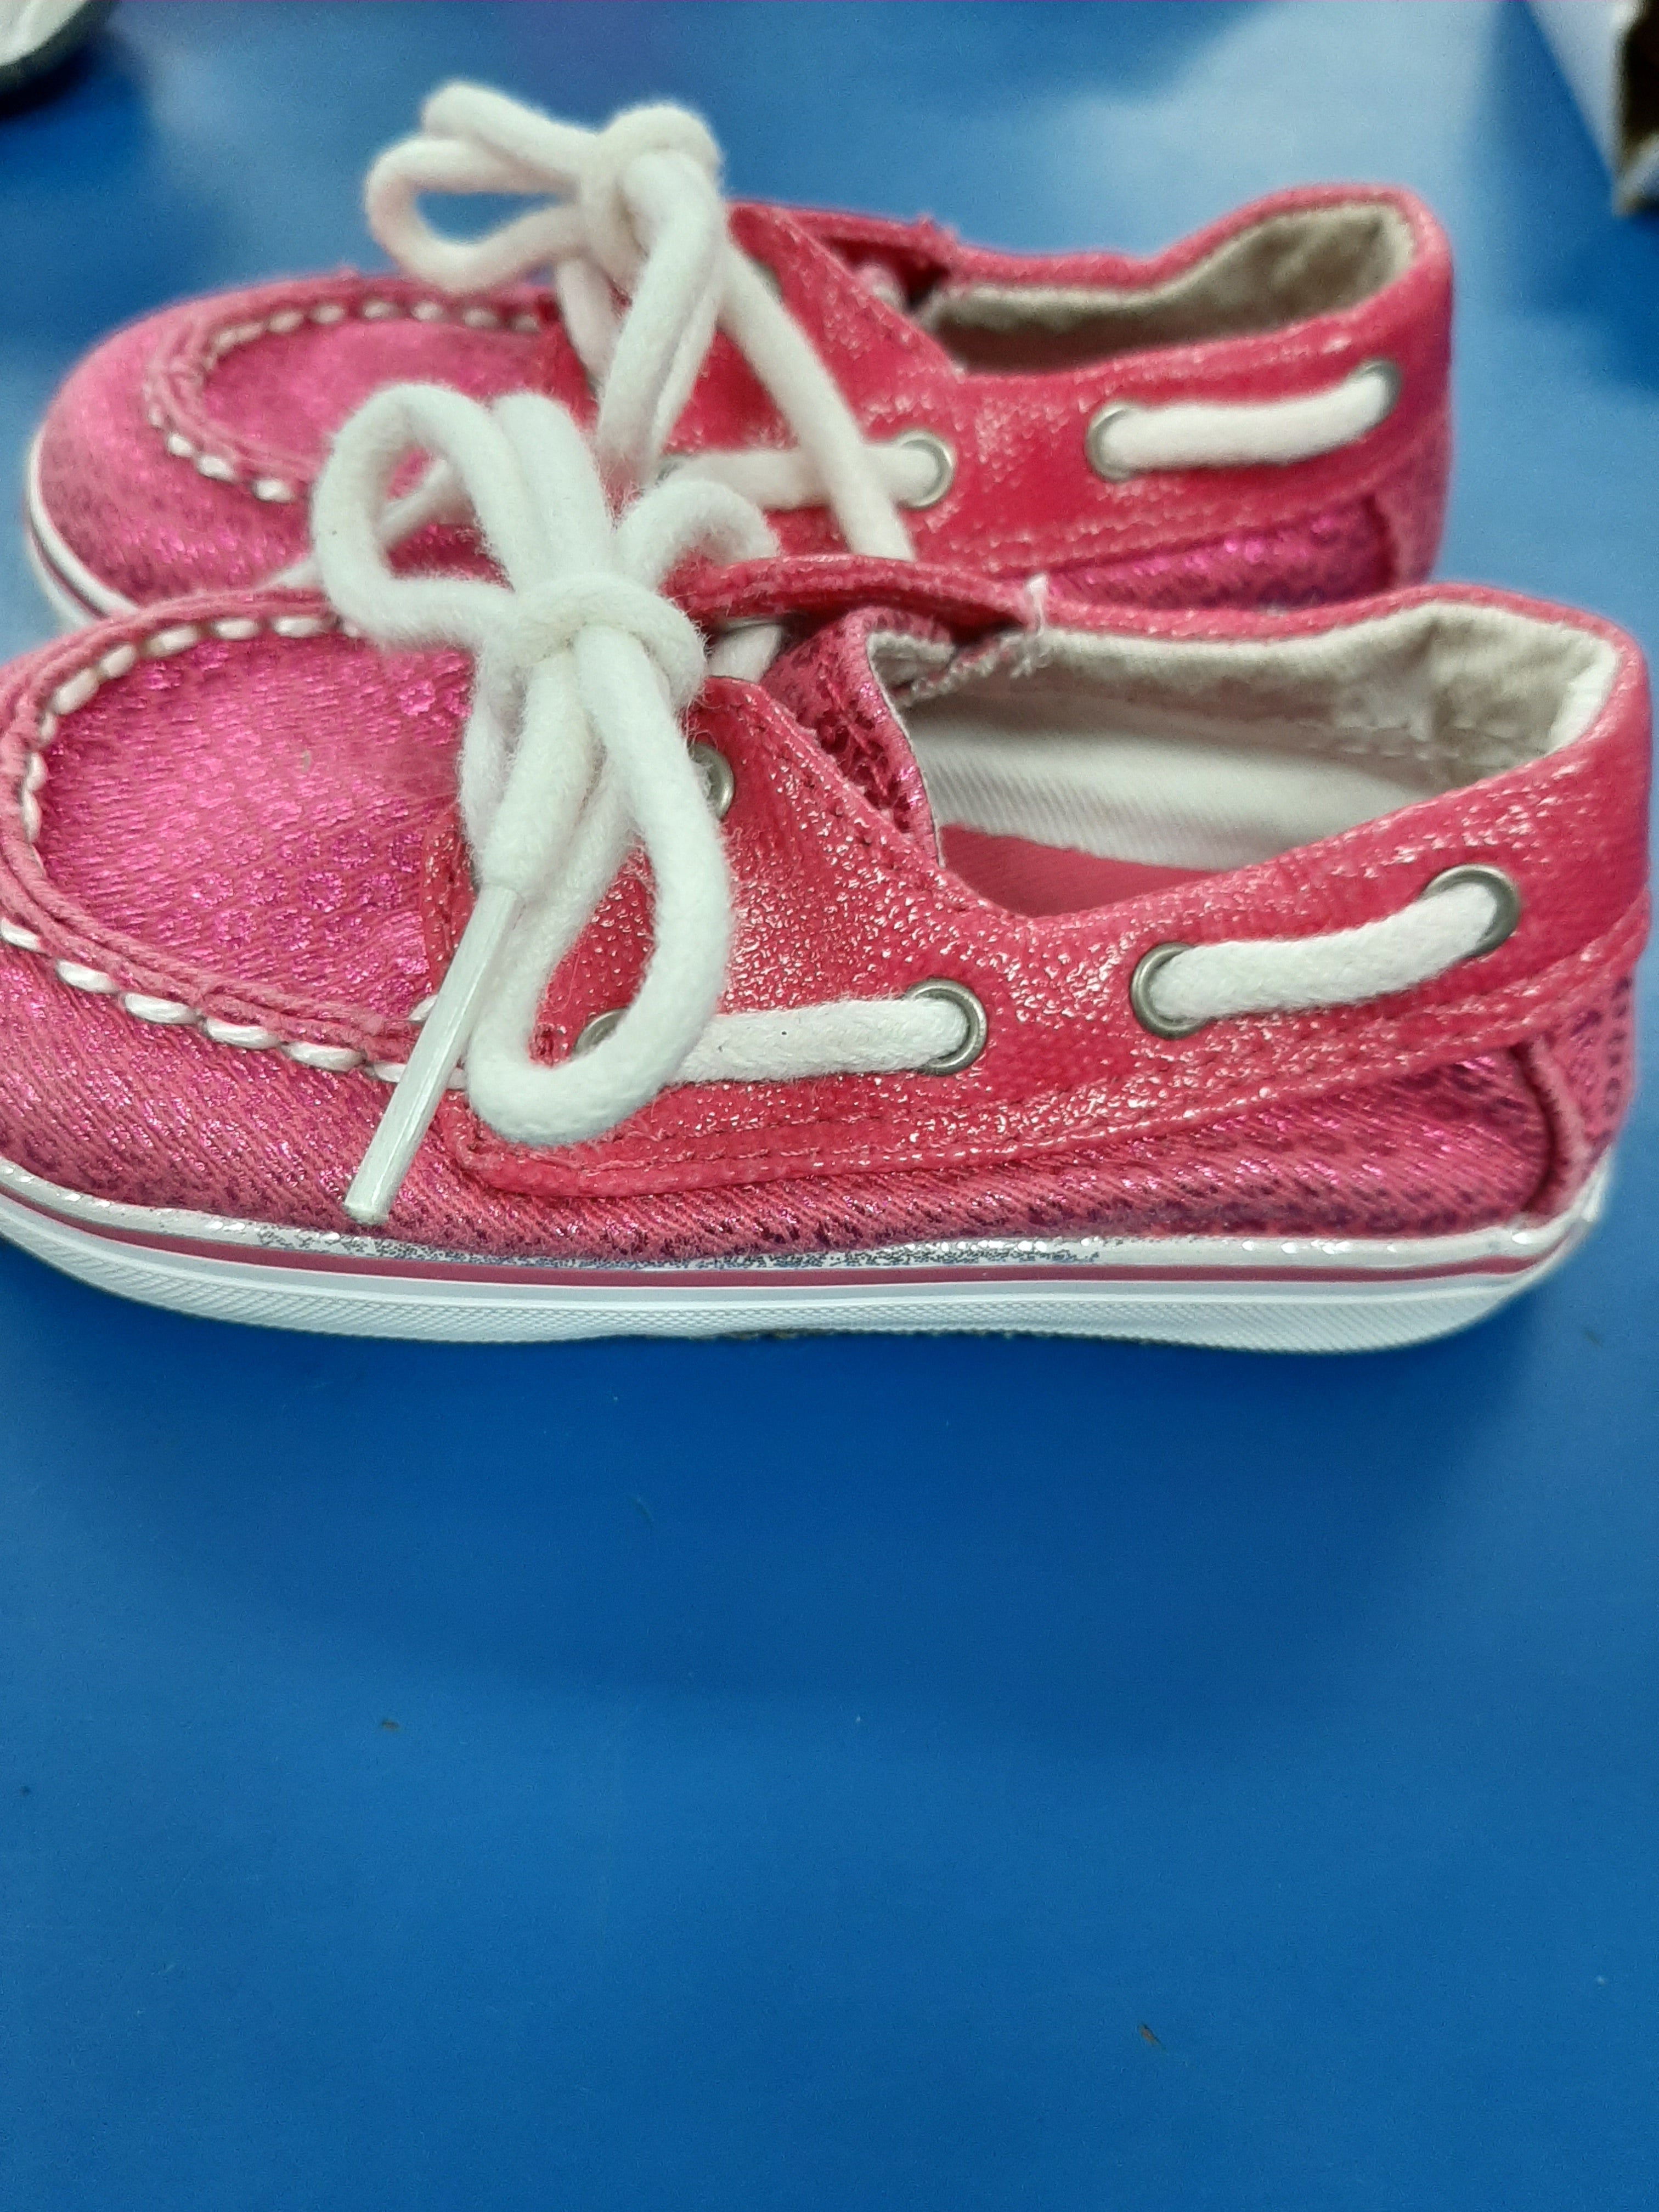 Sperry Top Sider Pink Sparkle sz 3